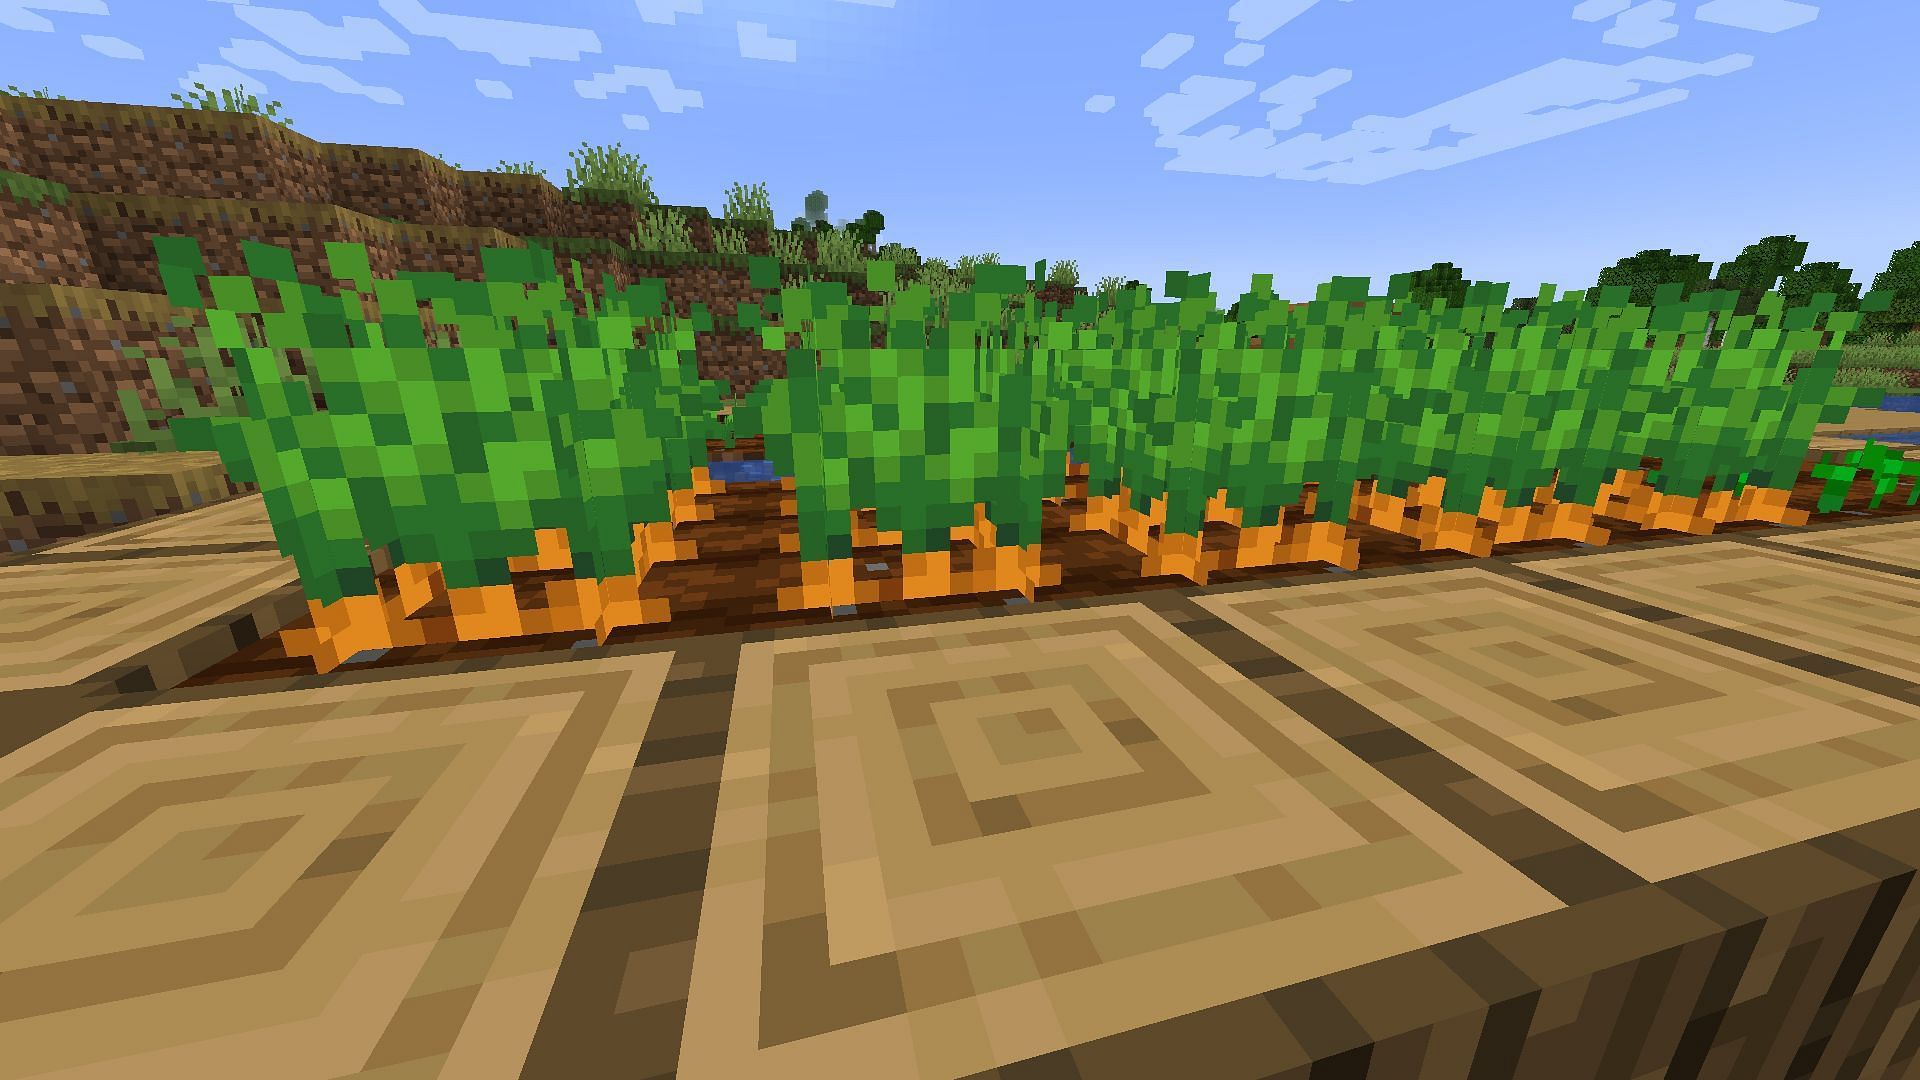 Food items are the most important resource to farm in Minecraft 1.19 (Image via Mojang)